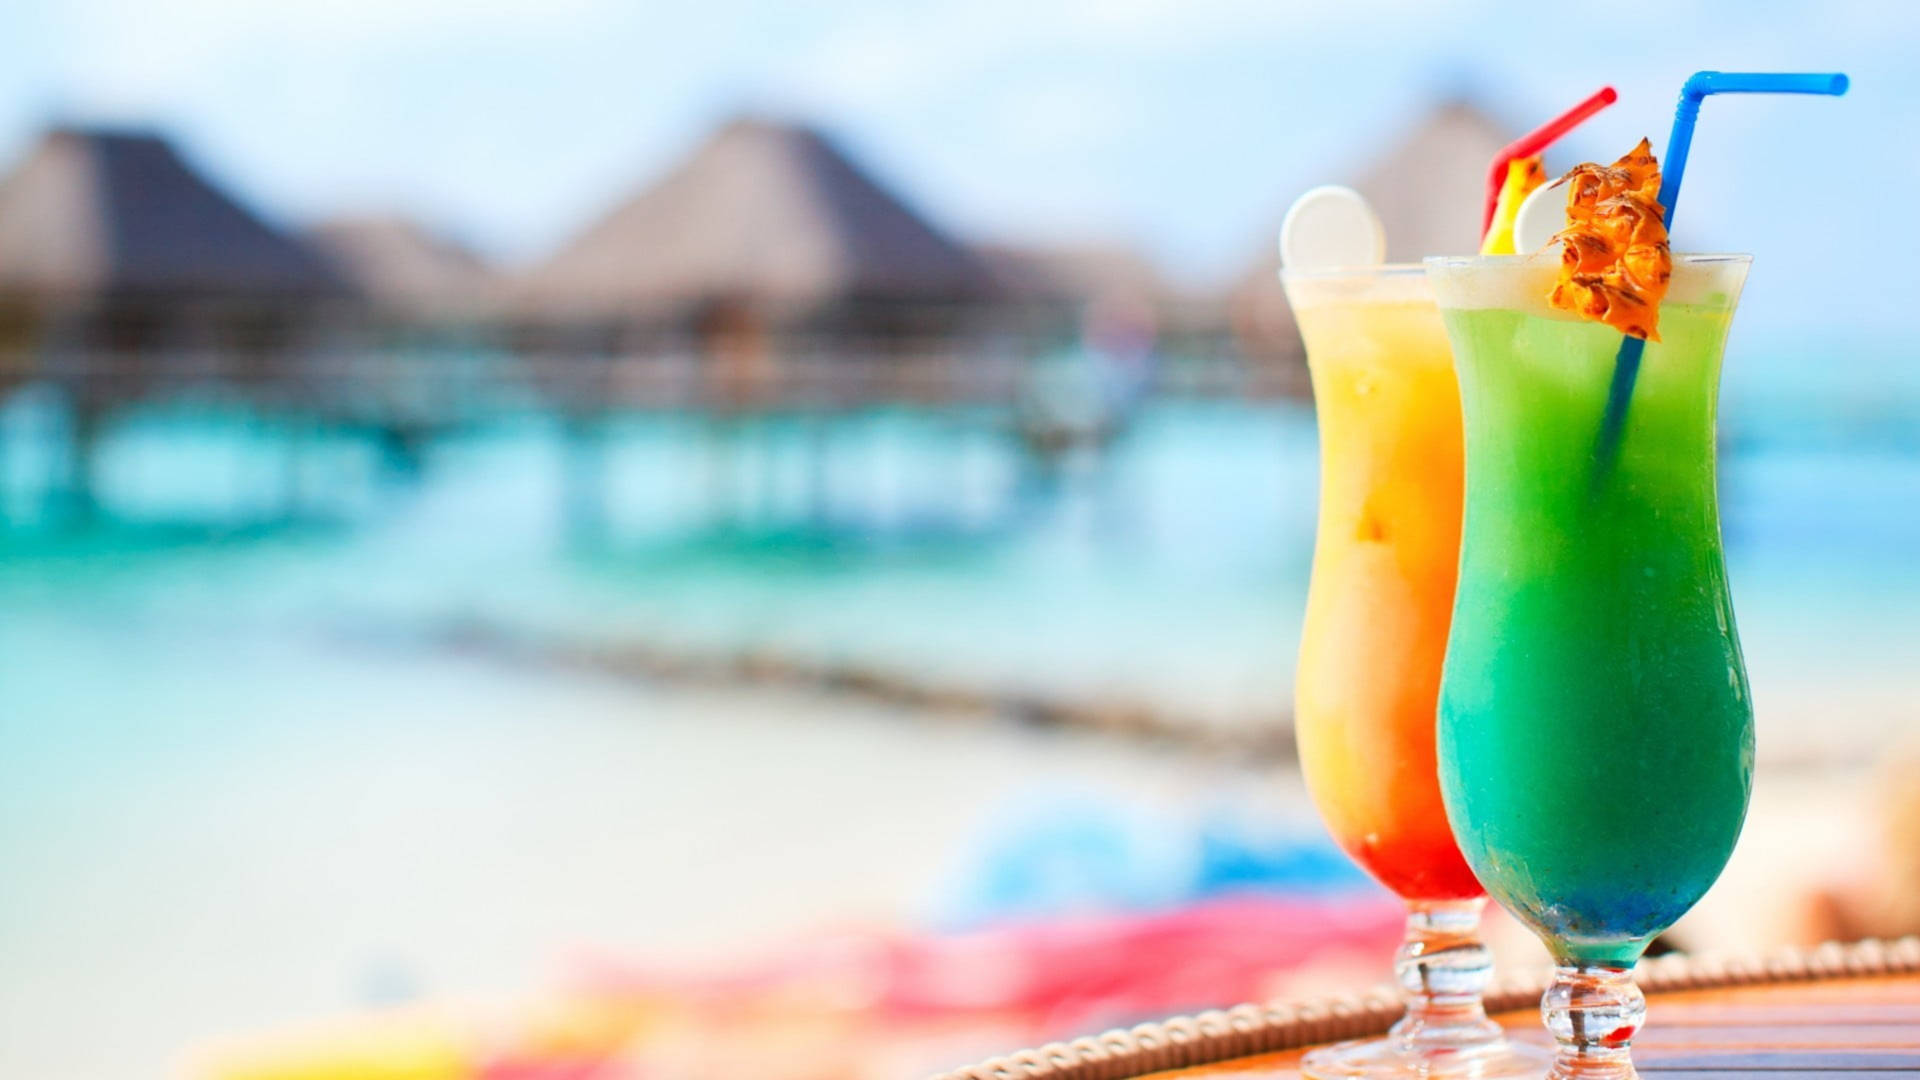 Blue Curacao, Tequila Sunrise Tropical Drink Wallpaper